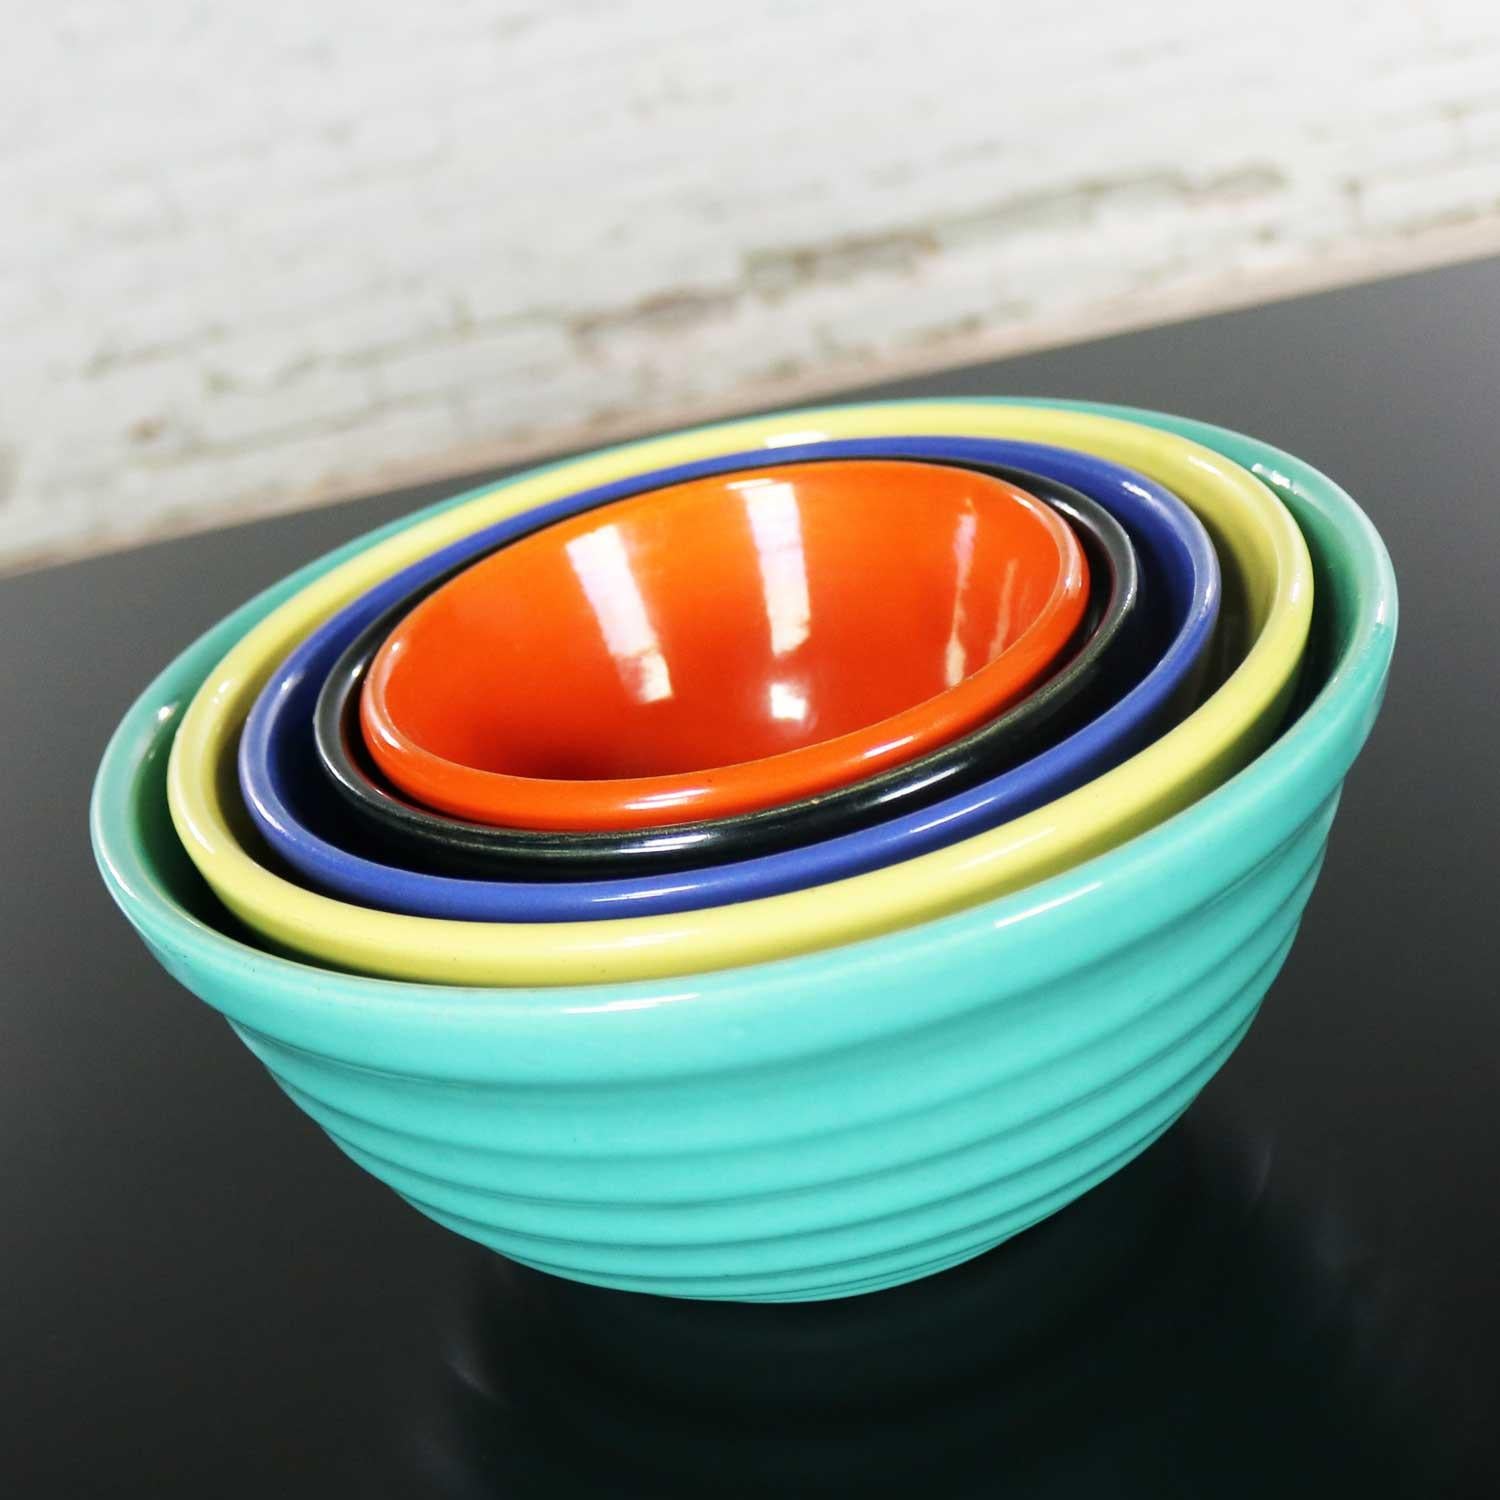 Handsome set of five multicolored Bauer Ringware nesting mixing bowls. They are numbered12, 18, 24, 30, and 36 and in five different colors. Their condition is very good with no chips, cracks, or chiggers. They do have come signs of use in the